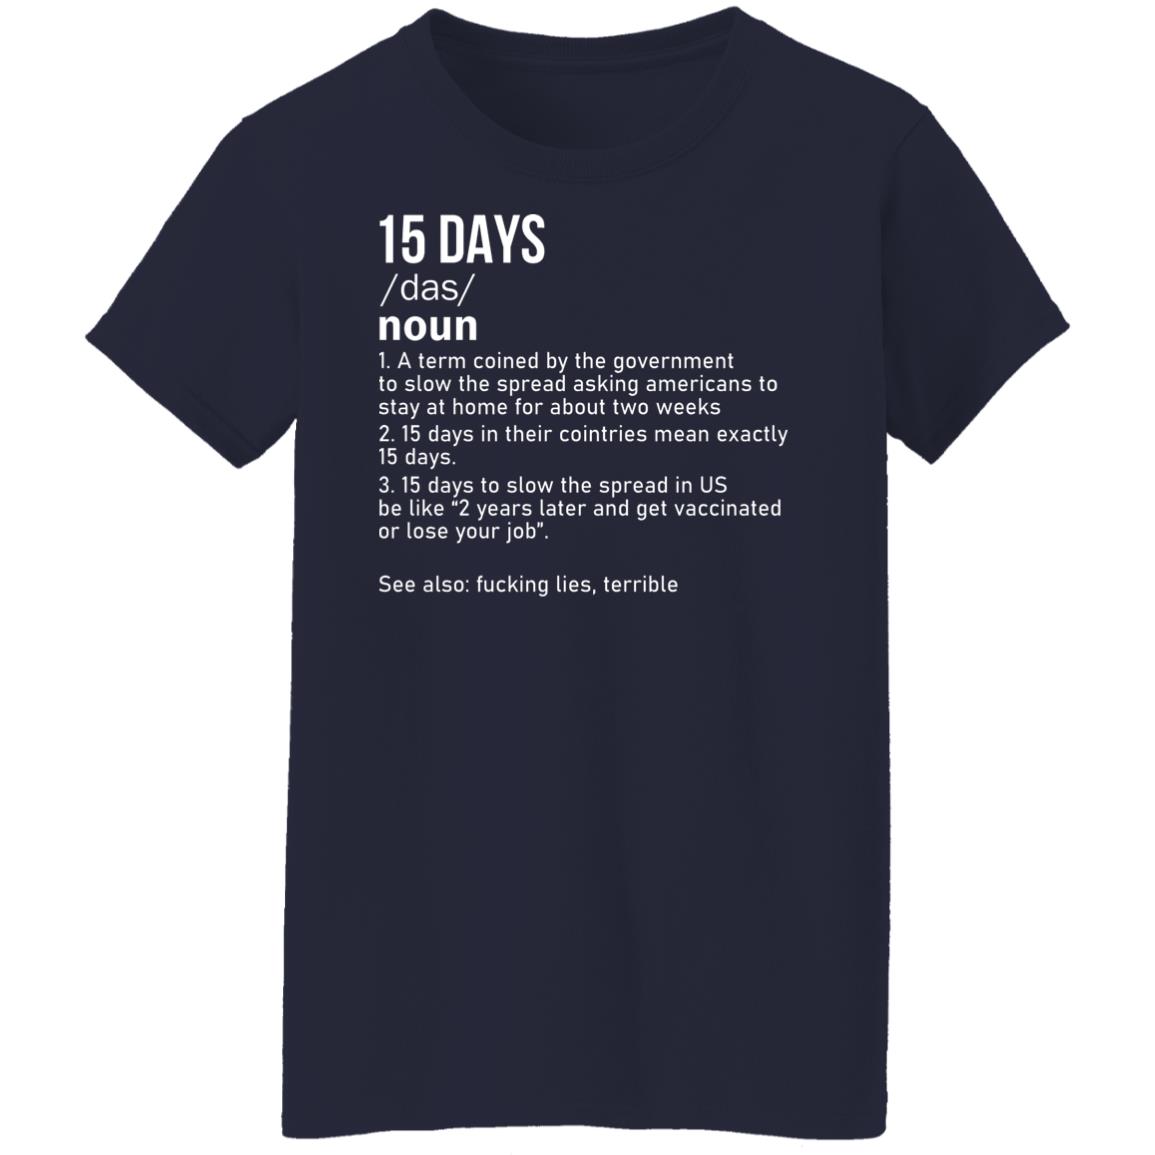 15-days-to-slow-the-spread-t-shirt-teemoonley